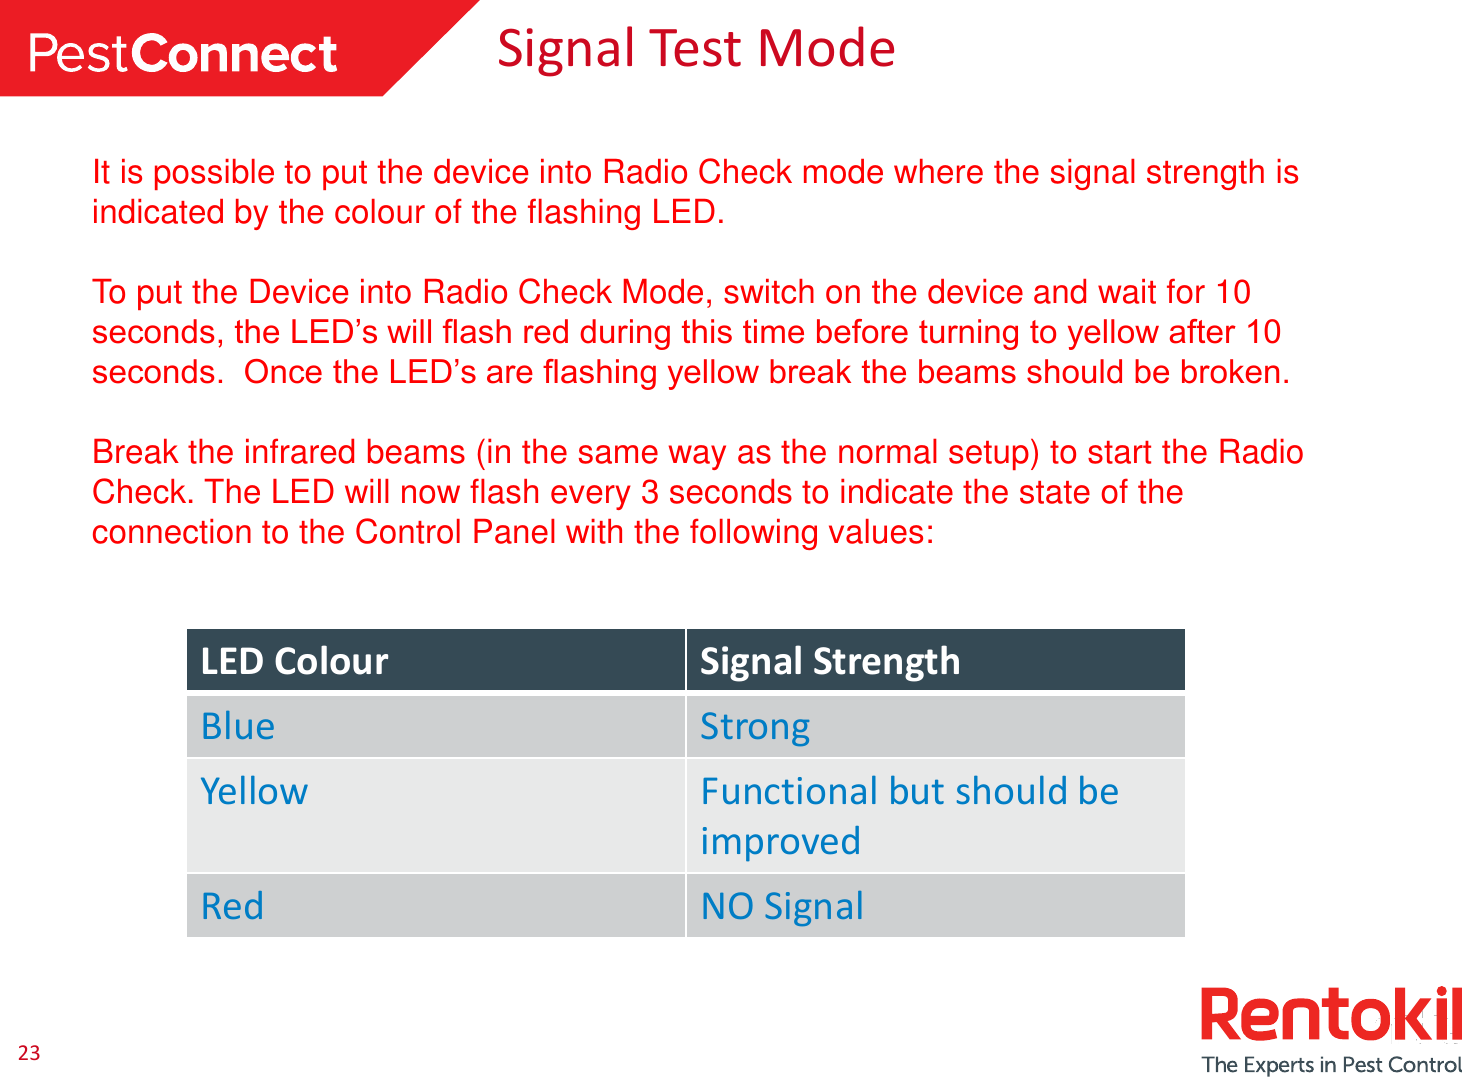 23 Signal Test Mode It is possible to put the device into Radio Check mode where the signal strength is indicated by the colour of the flashing LED.   To put the Device into Radio Check Mode, switch on the device and wait for 10 seconds, the LED’s will flash red during this time before turning to yellow after 10 seconds.  Once the LED’s are flashing yellow break the beams should be broken.  Break the infrared beams (in the same way as the normal setup) to start the Radio Check. The LED will now flash every 3 seconds to indicate the state of the connection to the Control Panel with the following values: LED Colour Signal Strength Blue  Strong Yellow Functional but should be improved Red NO Signal 